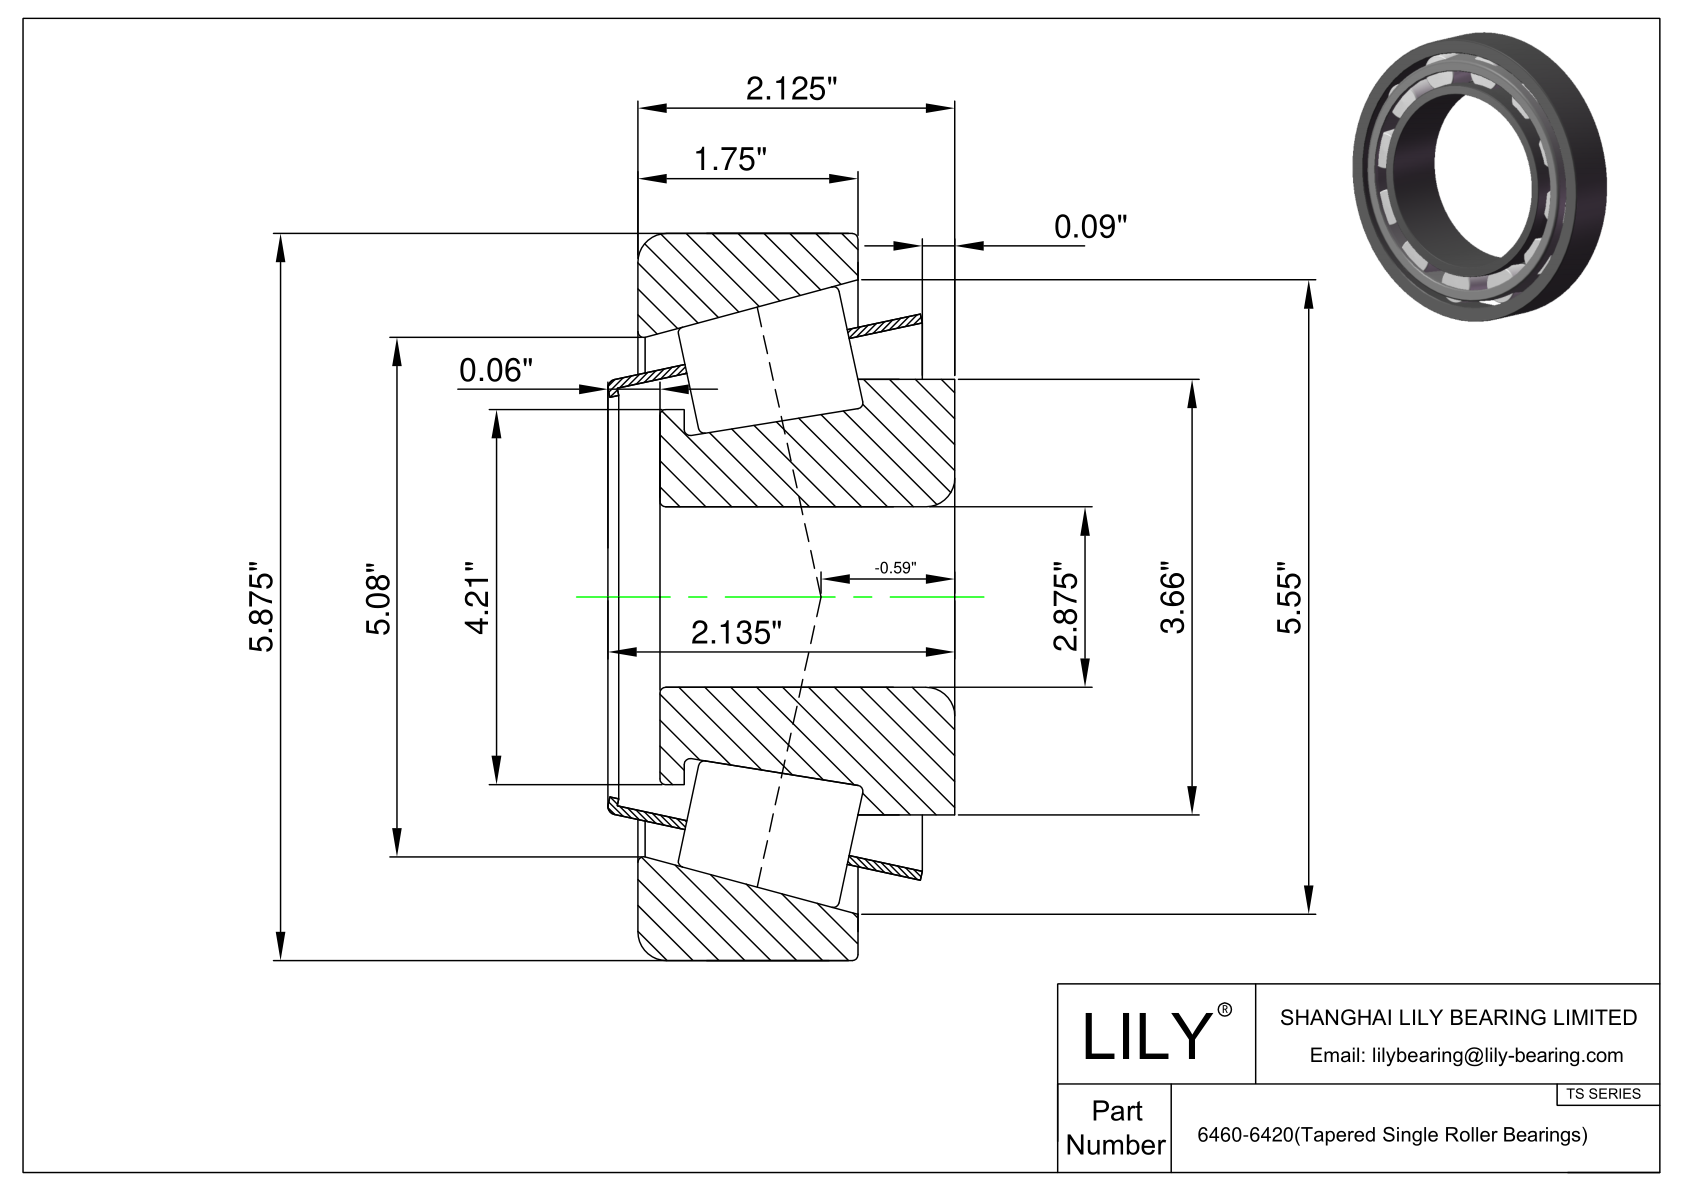 6460-6420 TS (Tapered Single Roller Bearings) (Imperial) cad drawing